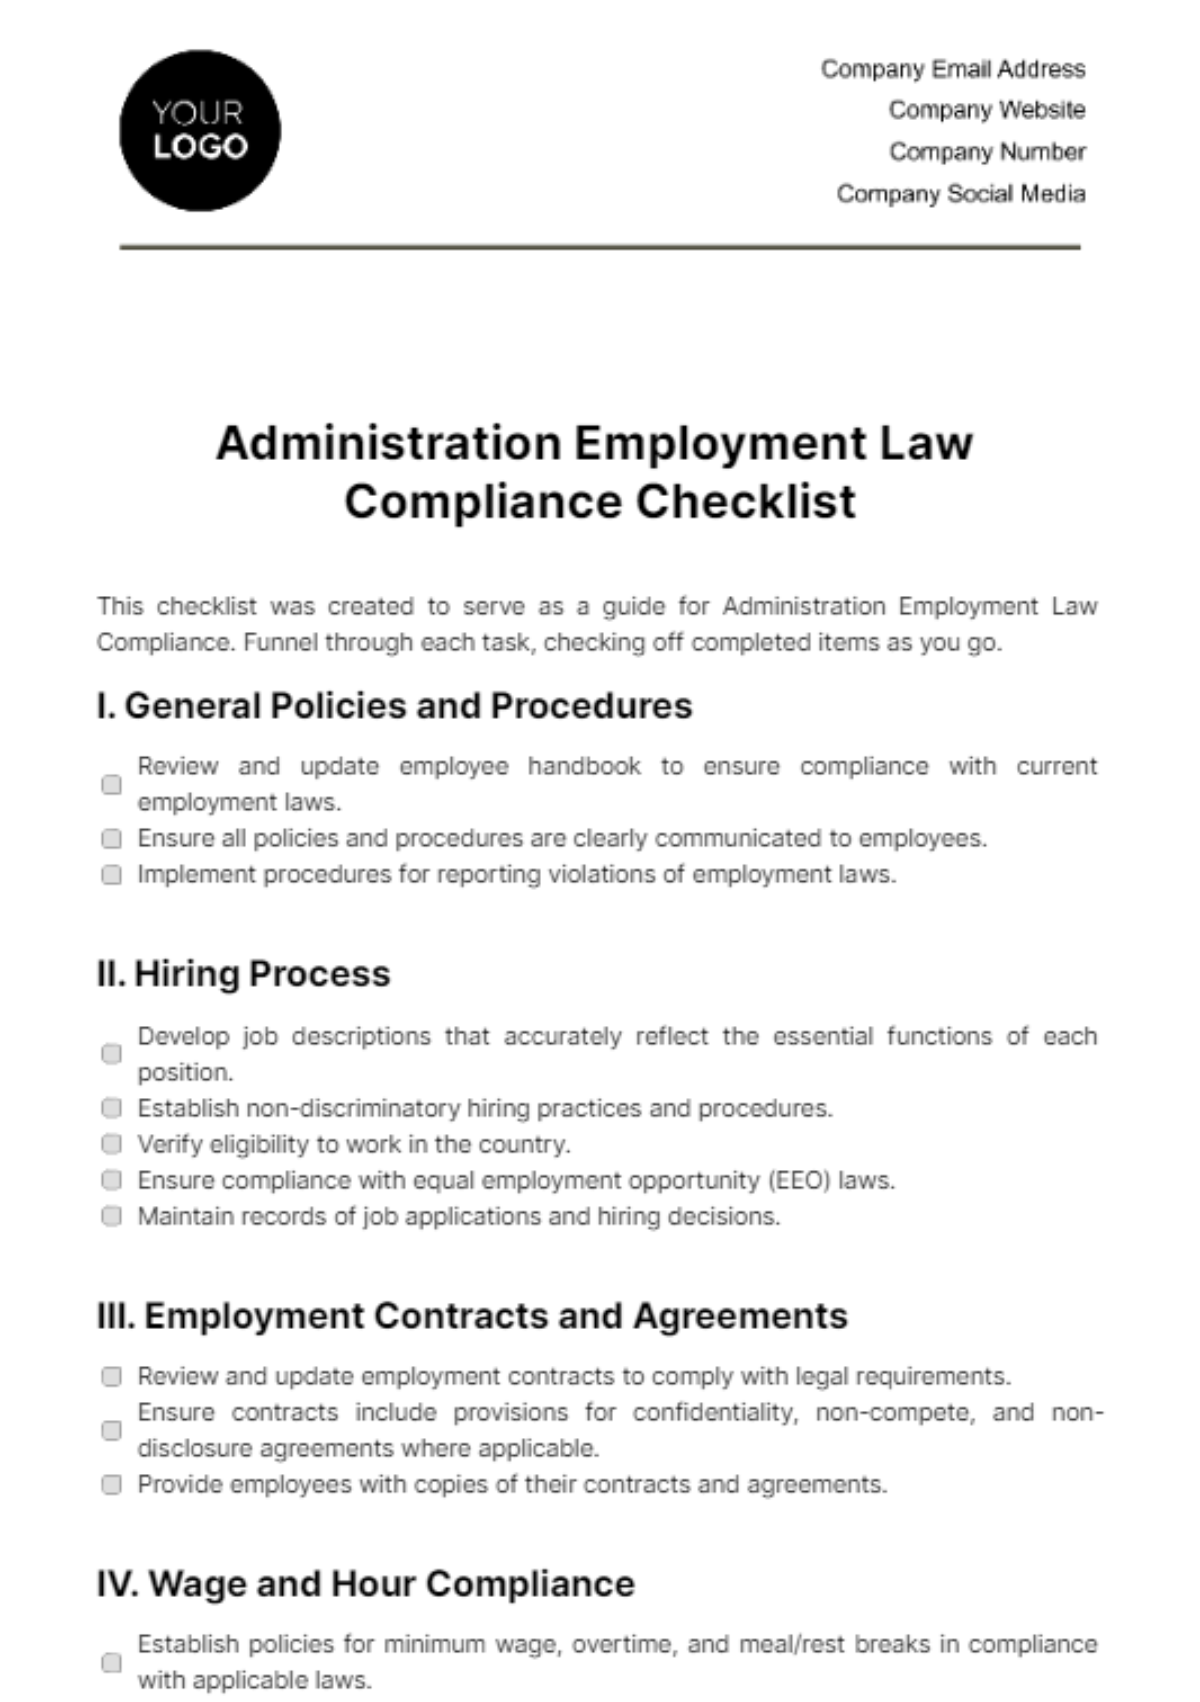 Administration Employment Law Compliance Checklist Template